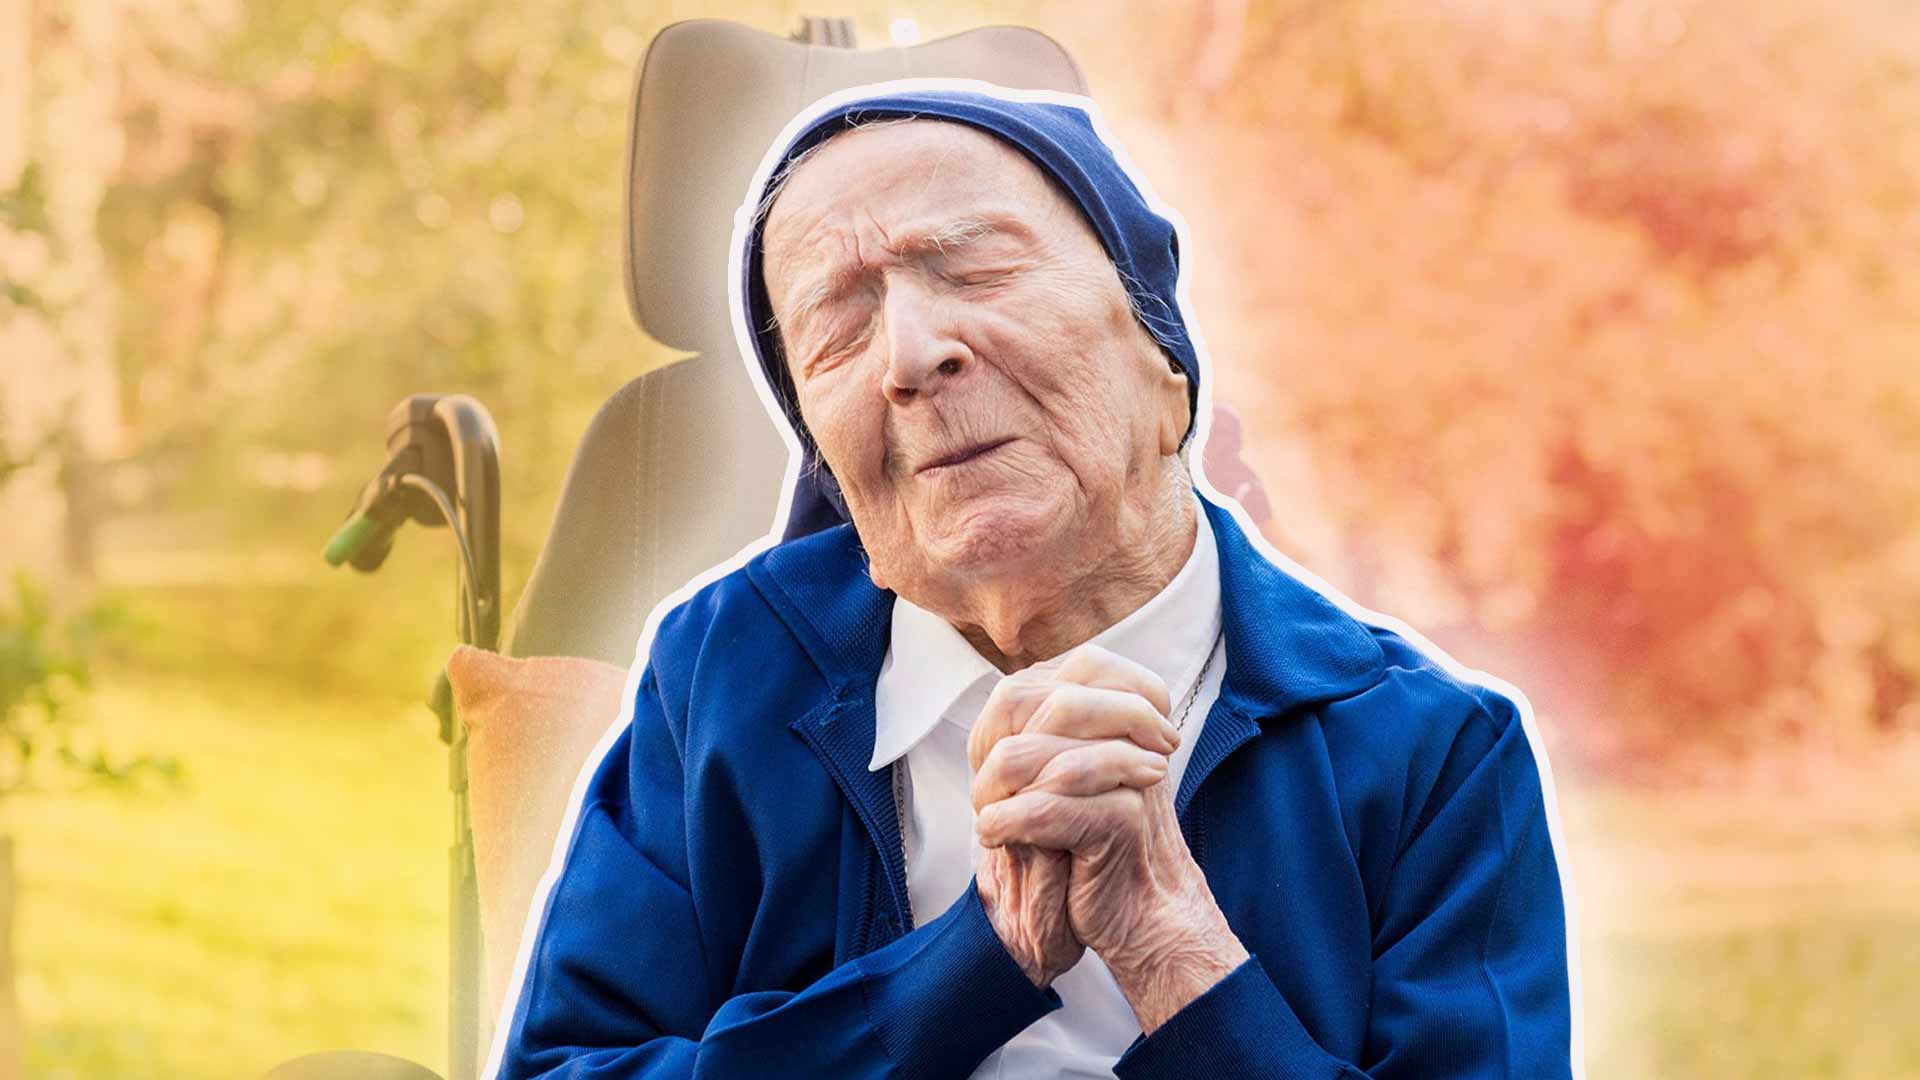 Sister Andre a French Nun Recovers from Coronavirus at the age of 117 years old second oldest person in the world